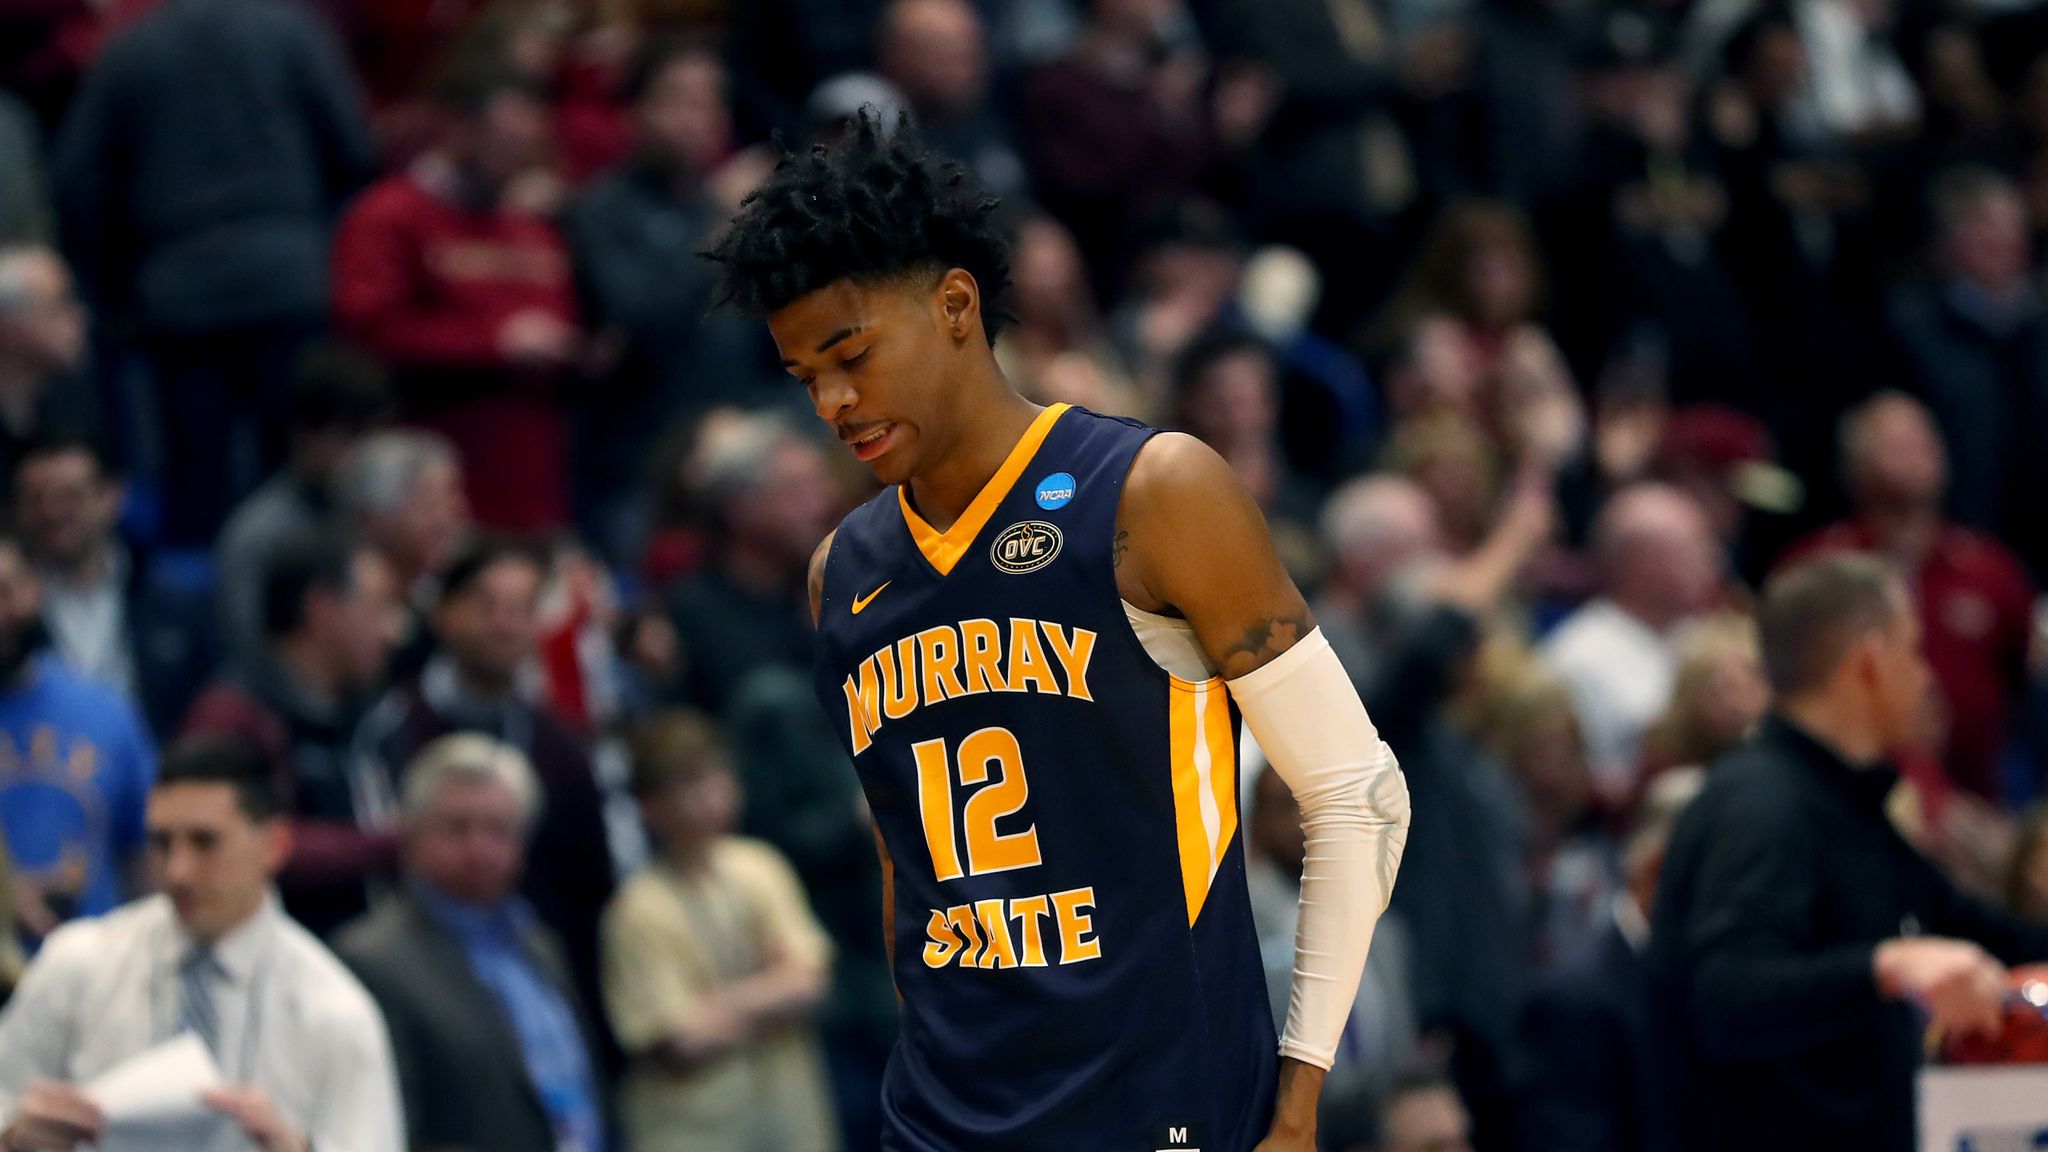 Ja Morant Is the Second-Best Player In The 2019 NBA Draft - Per Sources